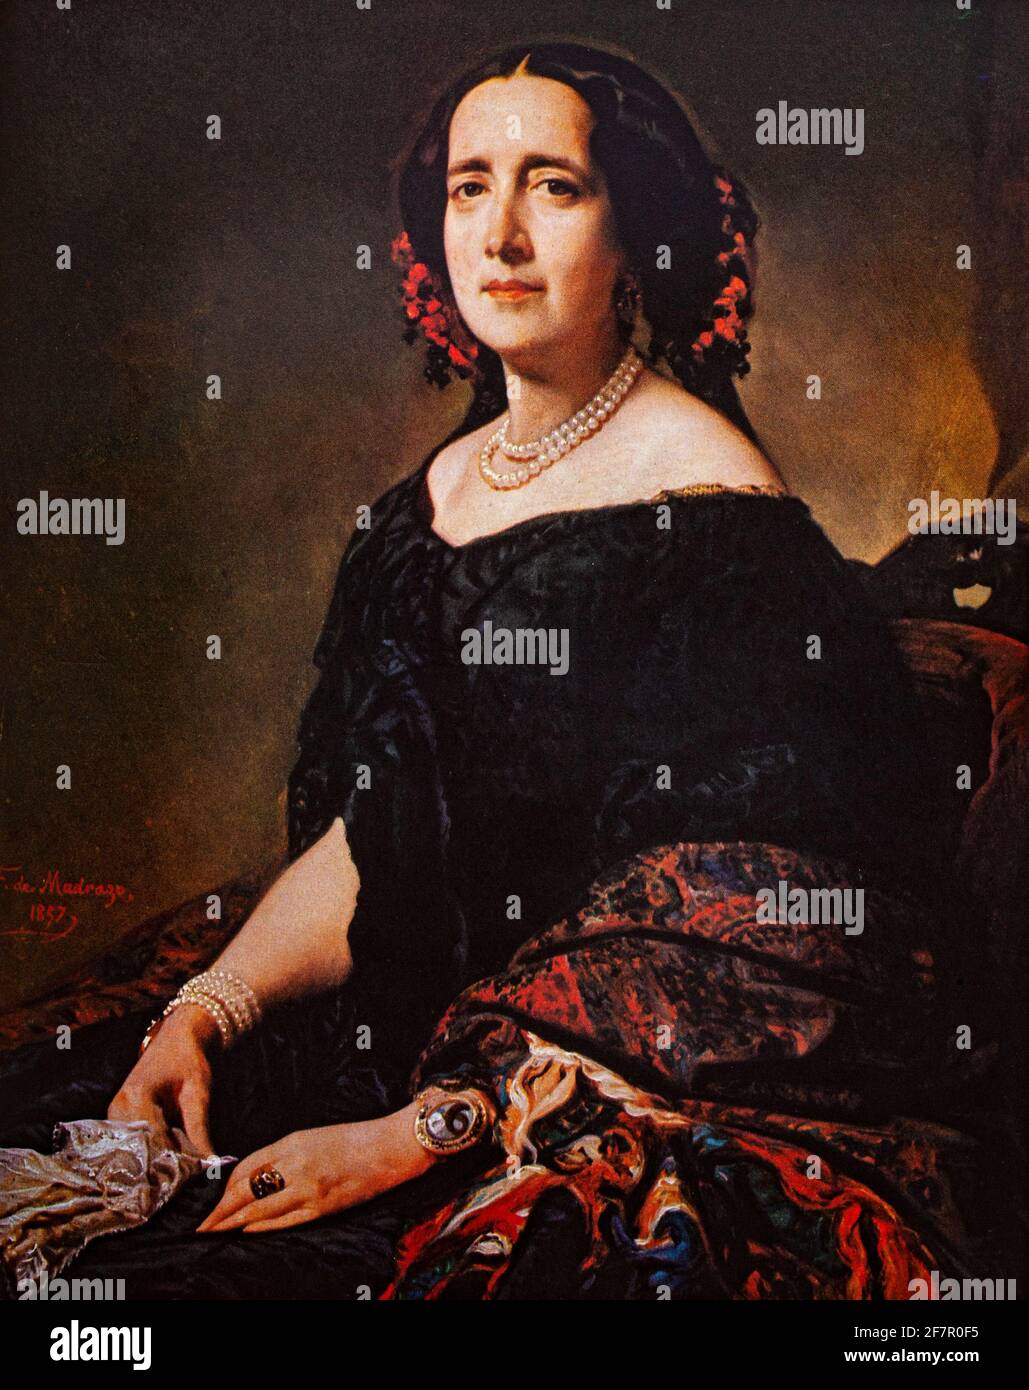 A portrait of Gertrudis Gómez de Avellaneda (1814-1873), a 19th-century Cuban-born Spanish writer. Her family moved to Spain in 1836, where she started writing as La Peregrina (The Pilgrim), she was a prolific writer and wrote 20 plays and numerous poems. Her most famous work, however, is the antislavery novel Sab, published in Madrid in 1841. The artist is Federico de Madrazo (1815-1894) a Spanish painter. Stock Photo